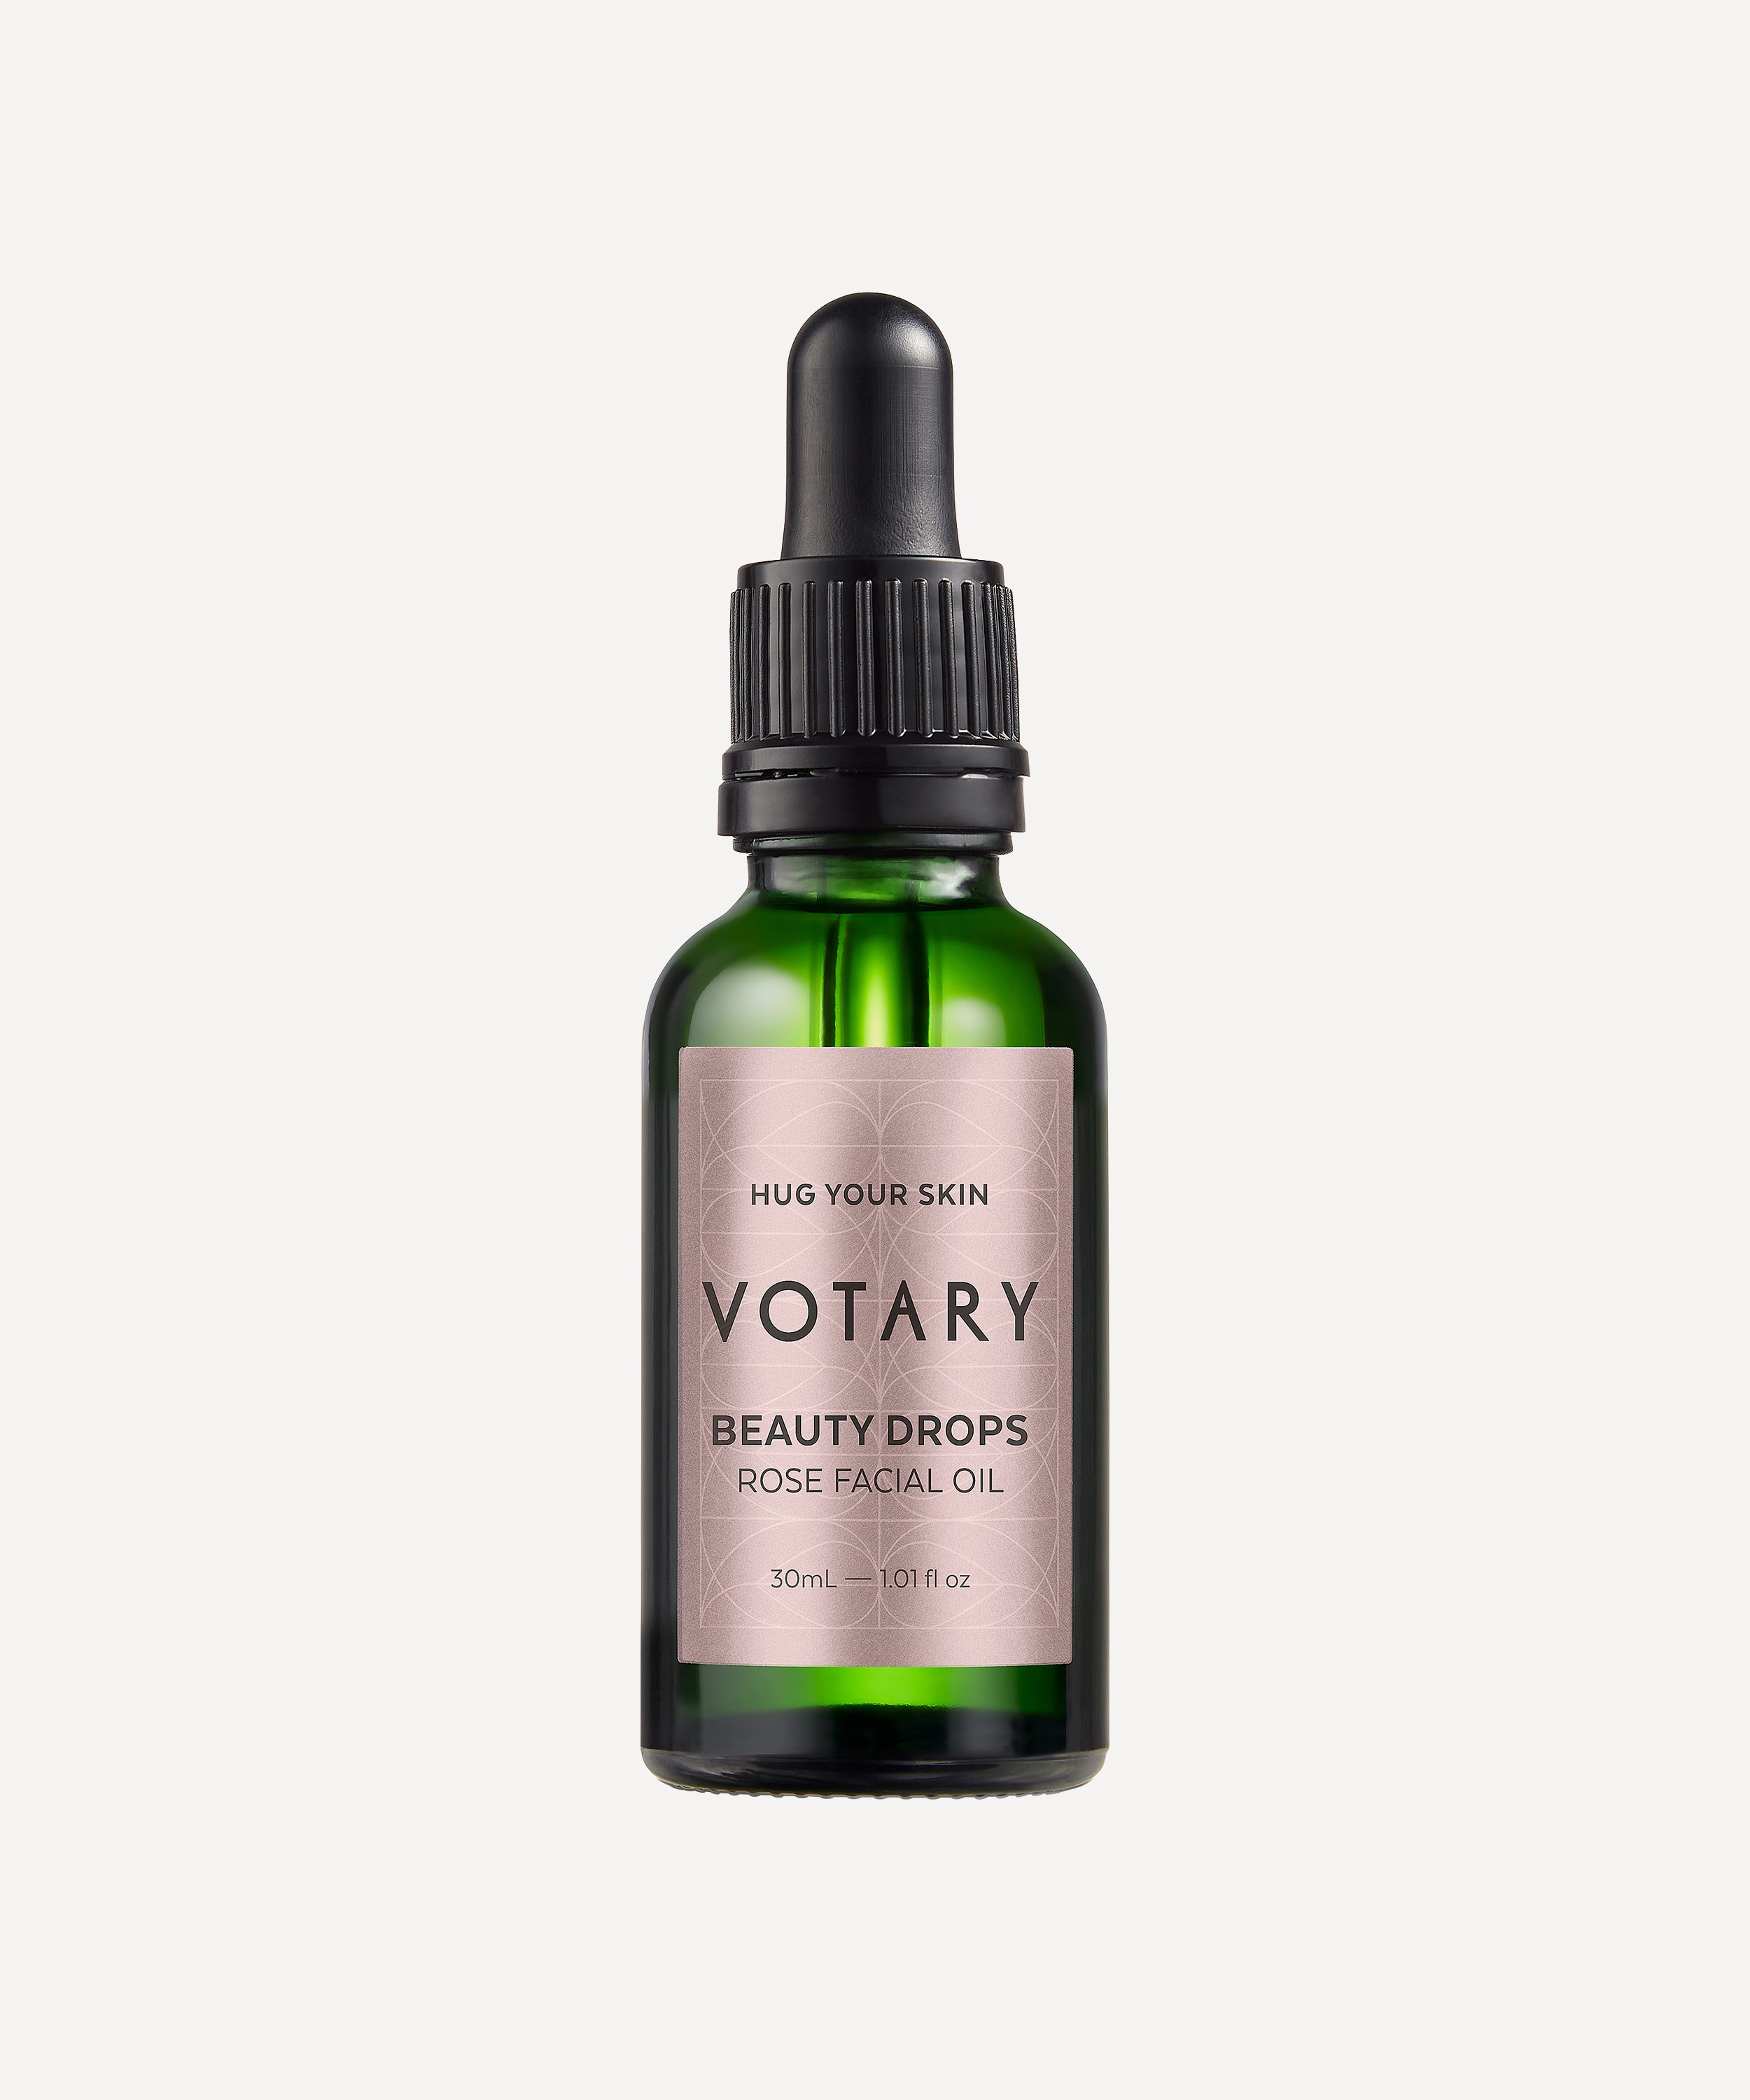 Votary - Beauty Drops Rose Facial Oil 30ml image number 0